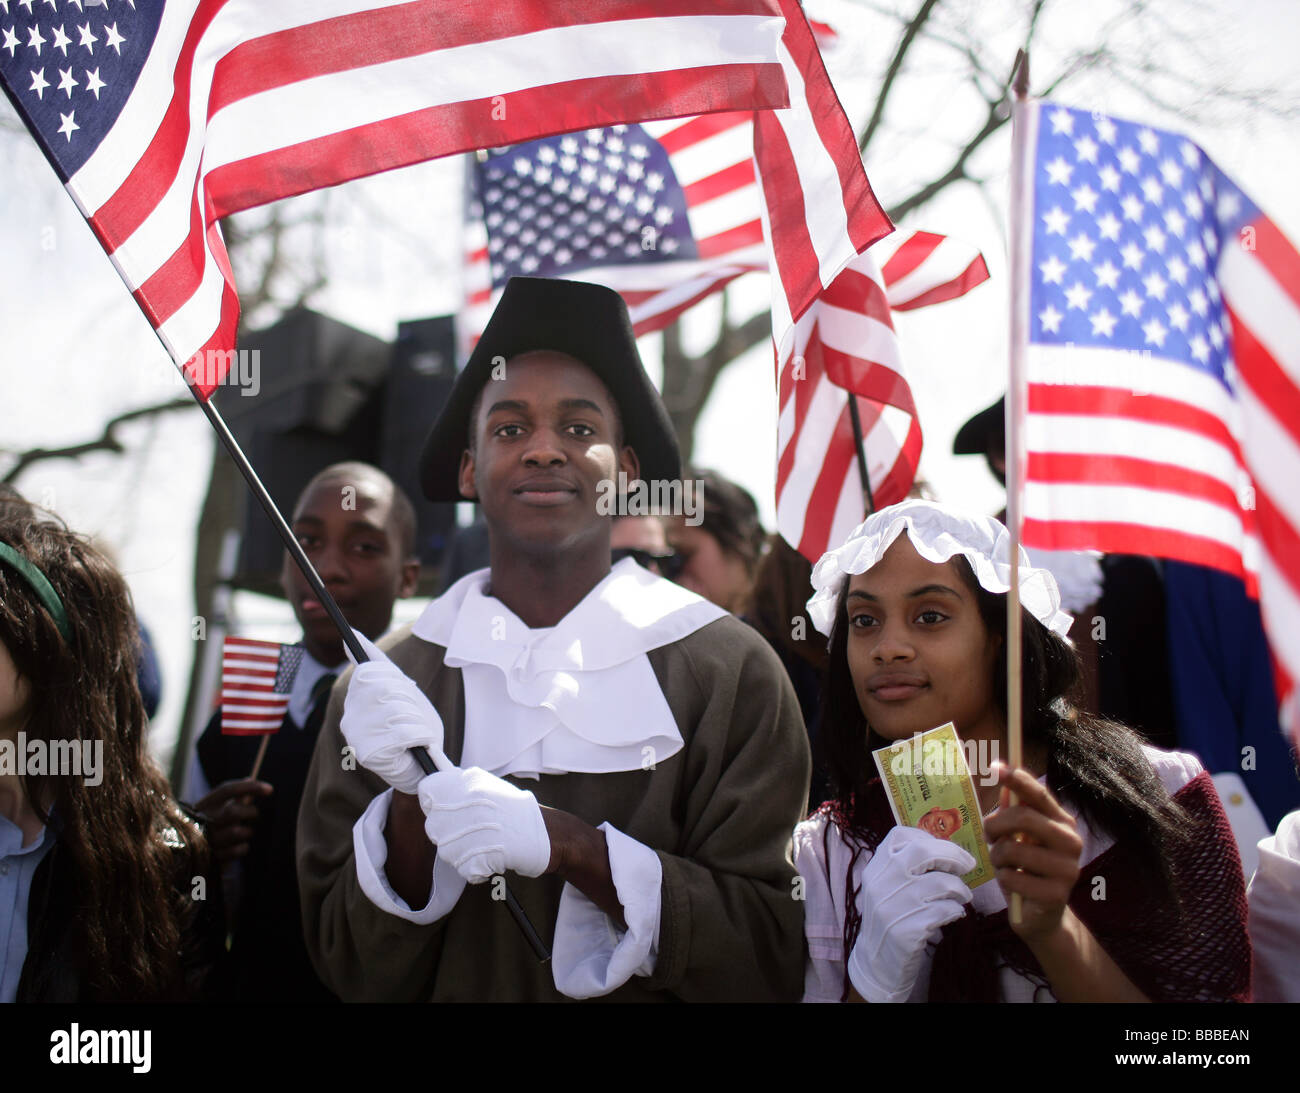 Students dressed in Colonial period costume hold American Flags during a 'Tea Party' Taxation protest in New Haven Connecticut Stock Photo